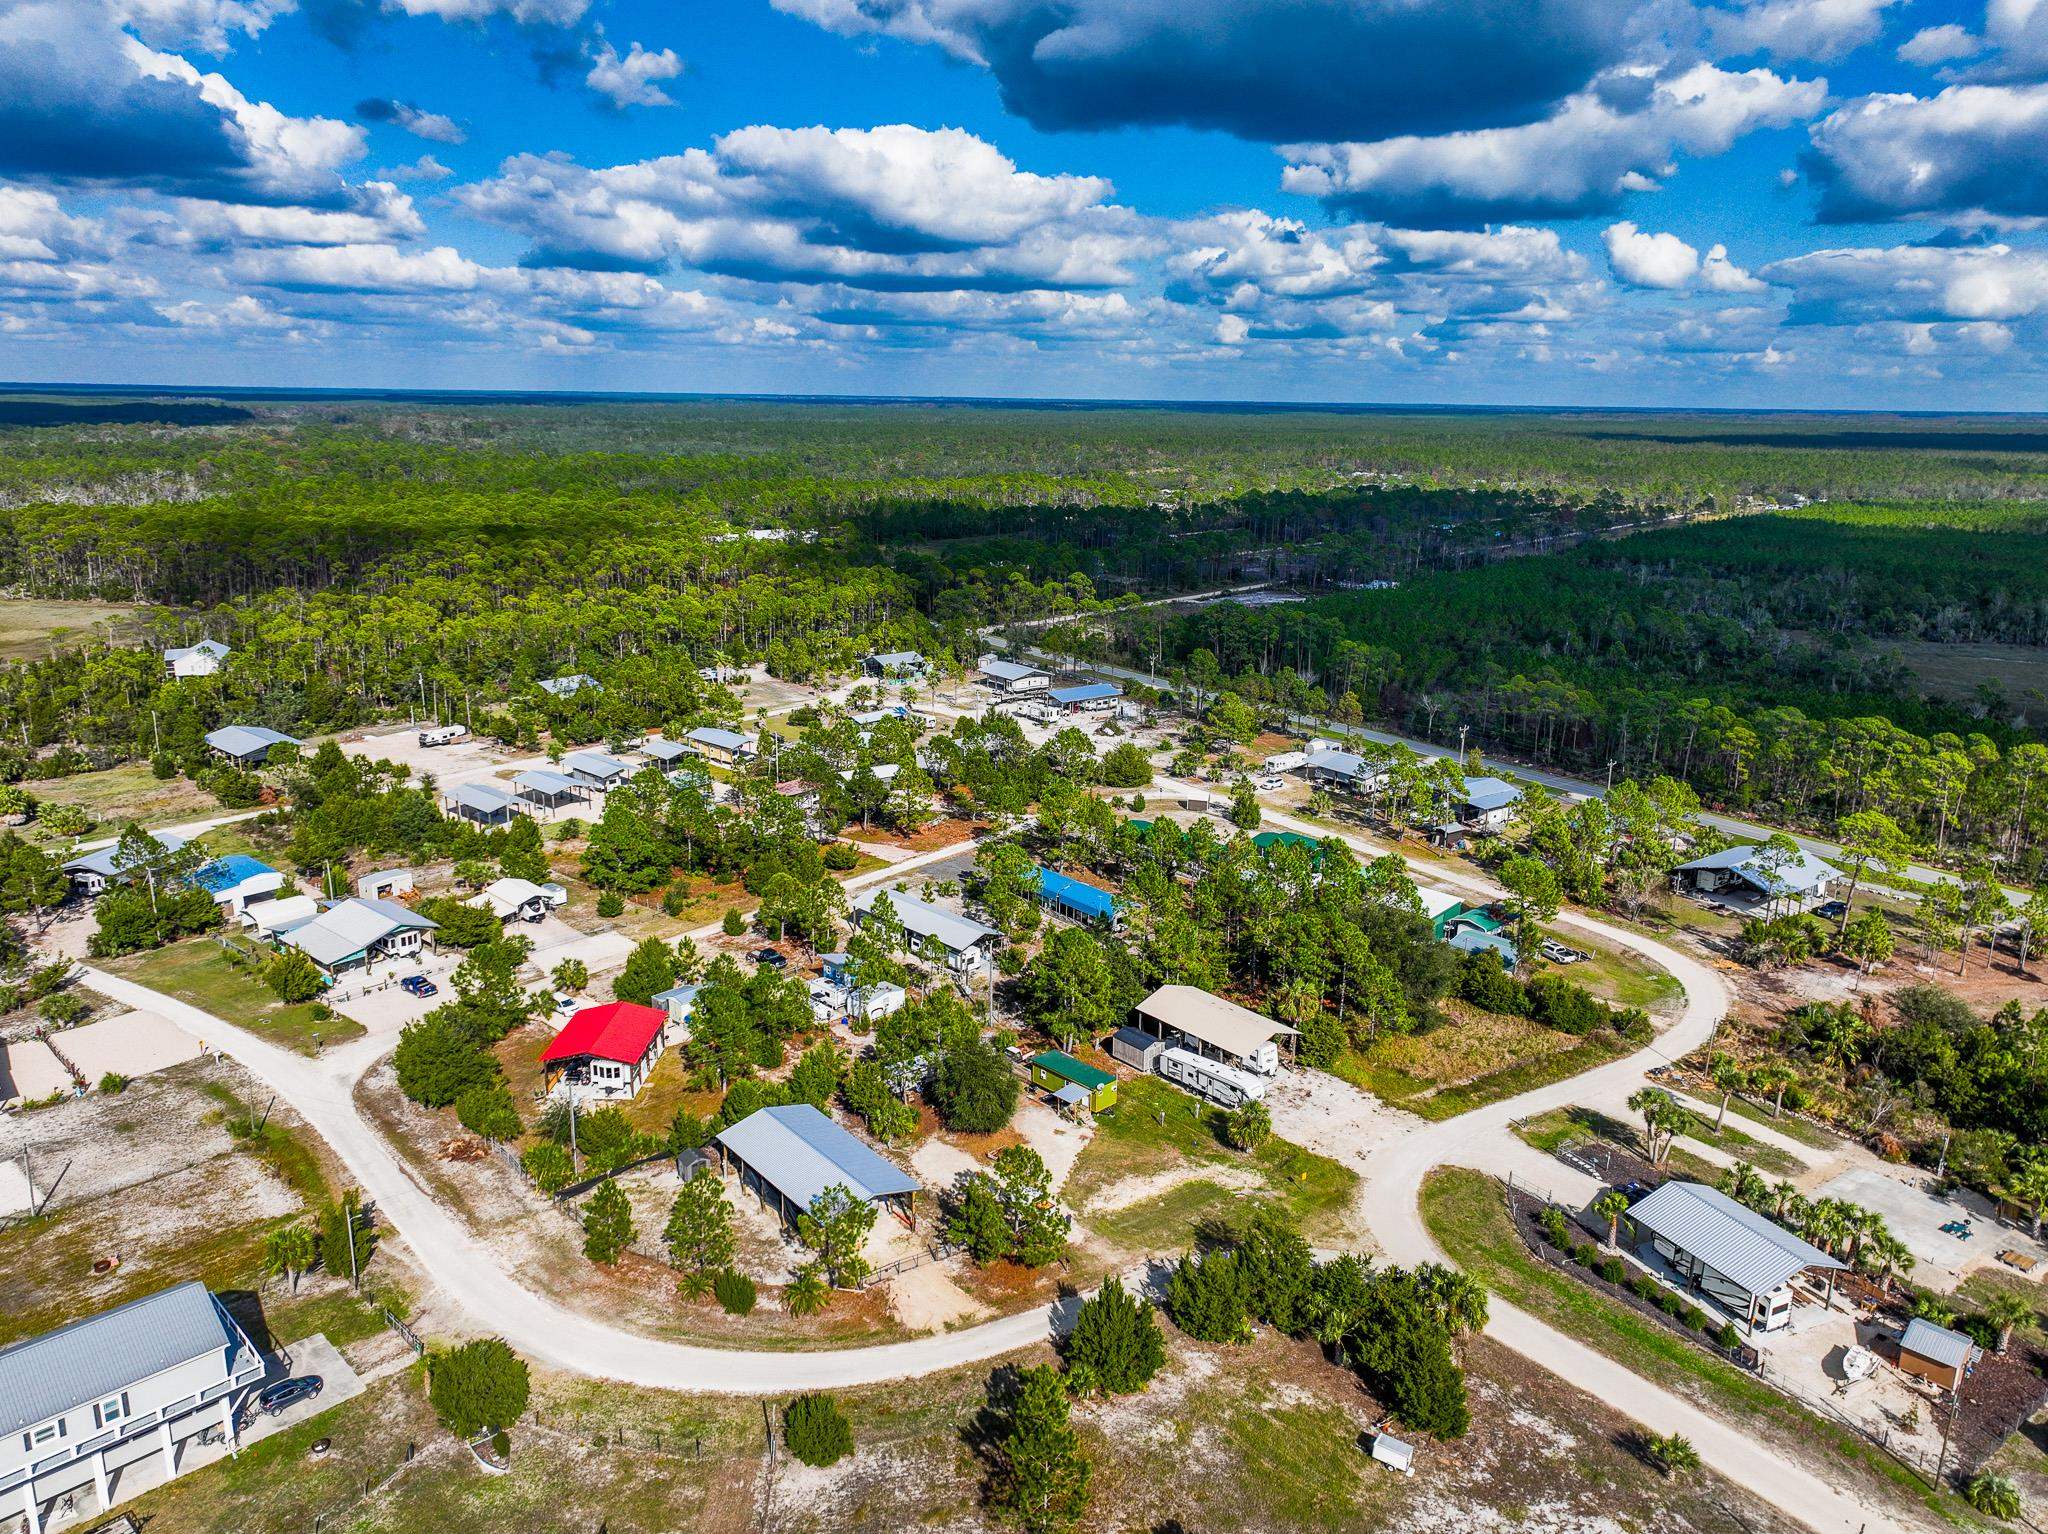 20903 Osprey,PERRY,Florida 32348-6666,Lots and land,Osprey,366184